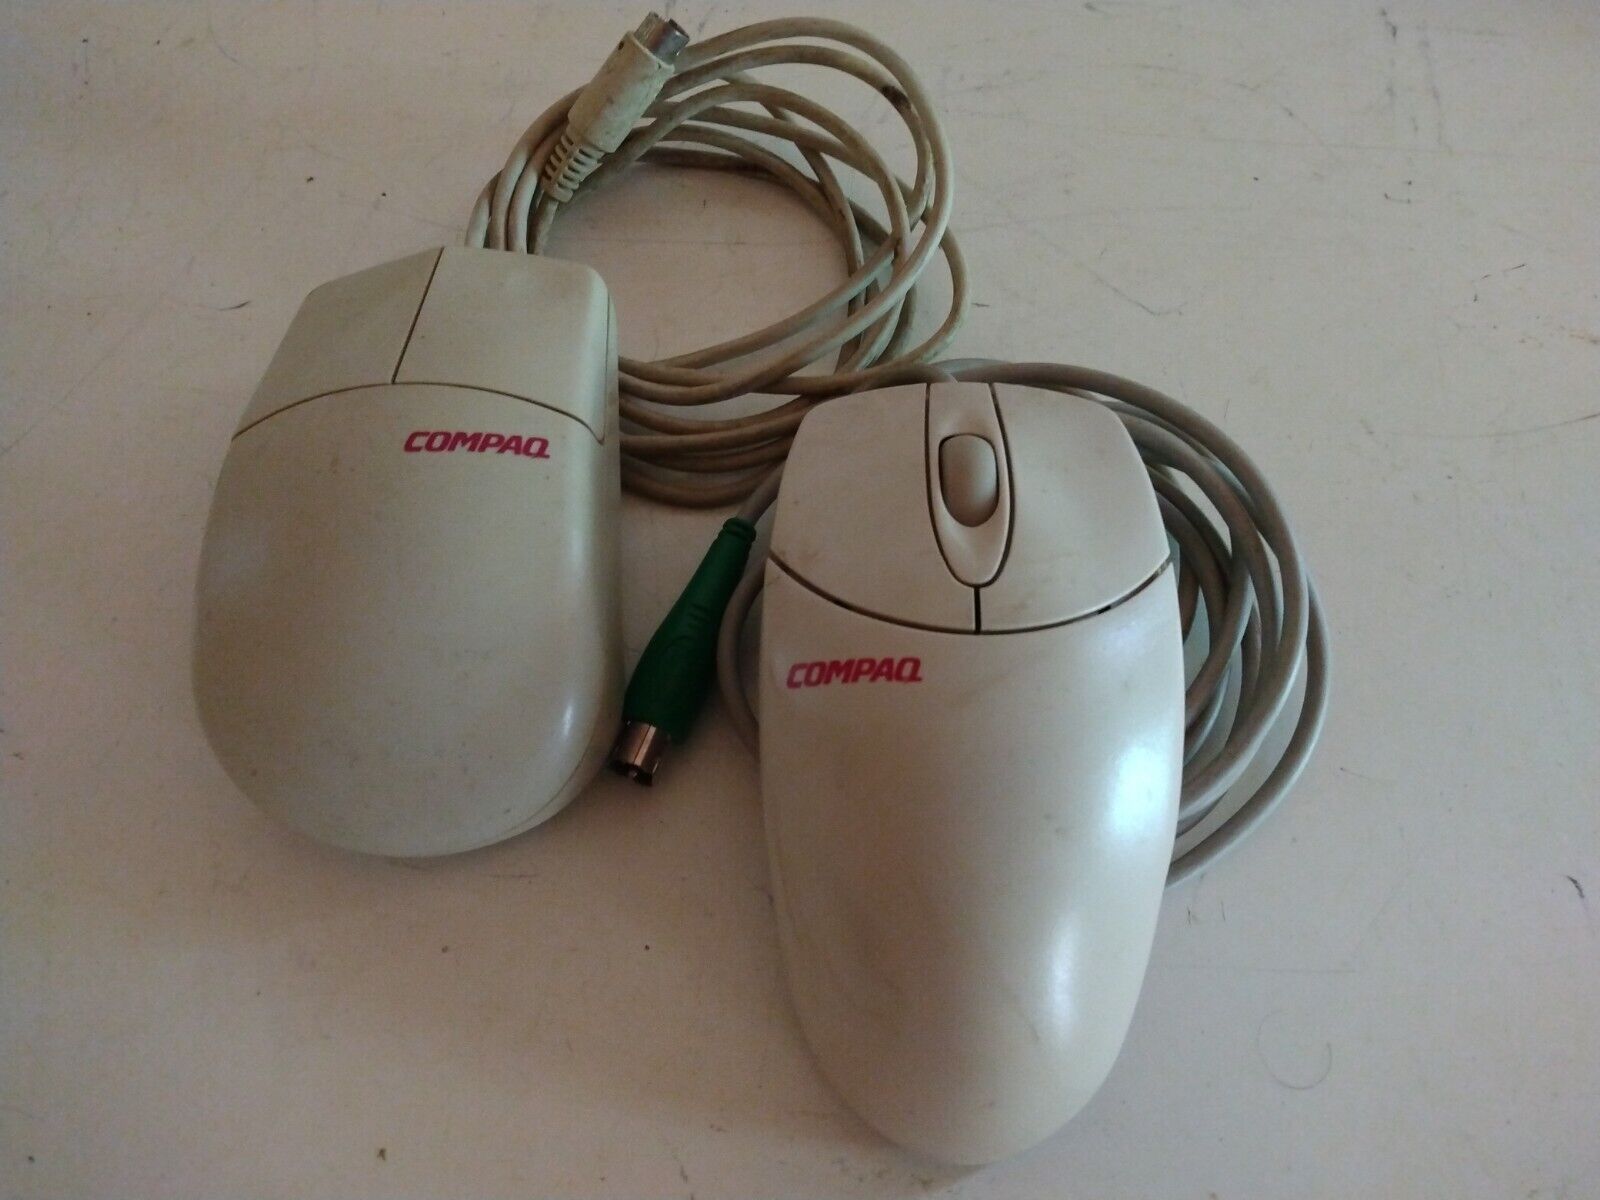 Compaq PS2 Mouse Lot of Two